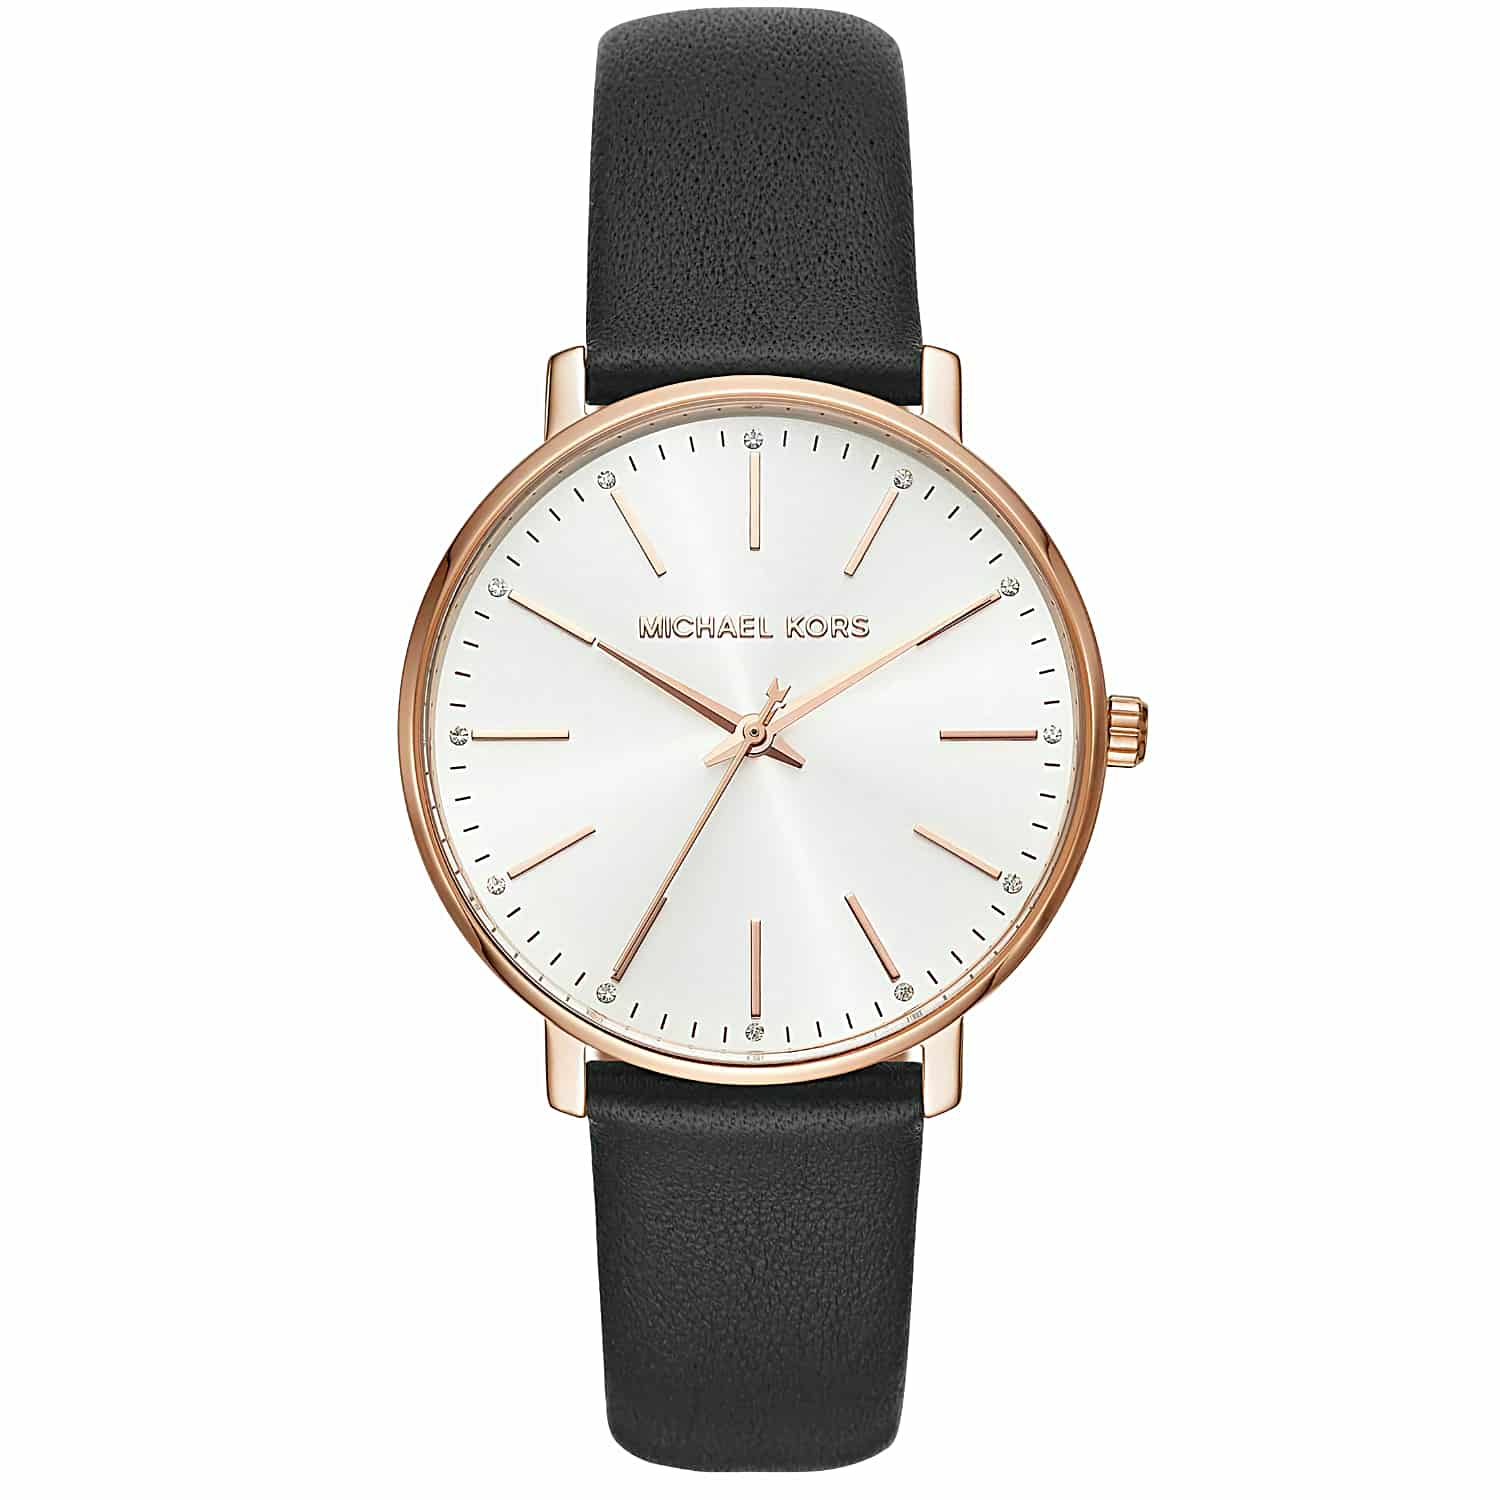 MK2834  Michael Kors Pyper 38mm Black Leather Watch.   Michael Kors  Pyper MK2834 features a stainless steel case, Leather strap and White Dial Humm -Buy Little things up to $1000 and choose 10 weekly or 5 fortnightly payments with no interes @christies.o